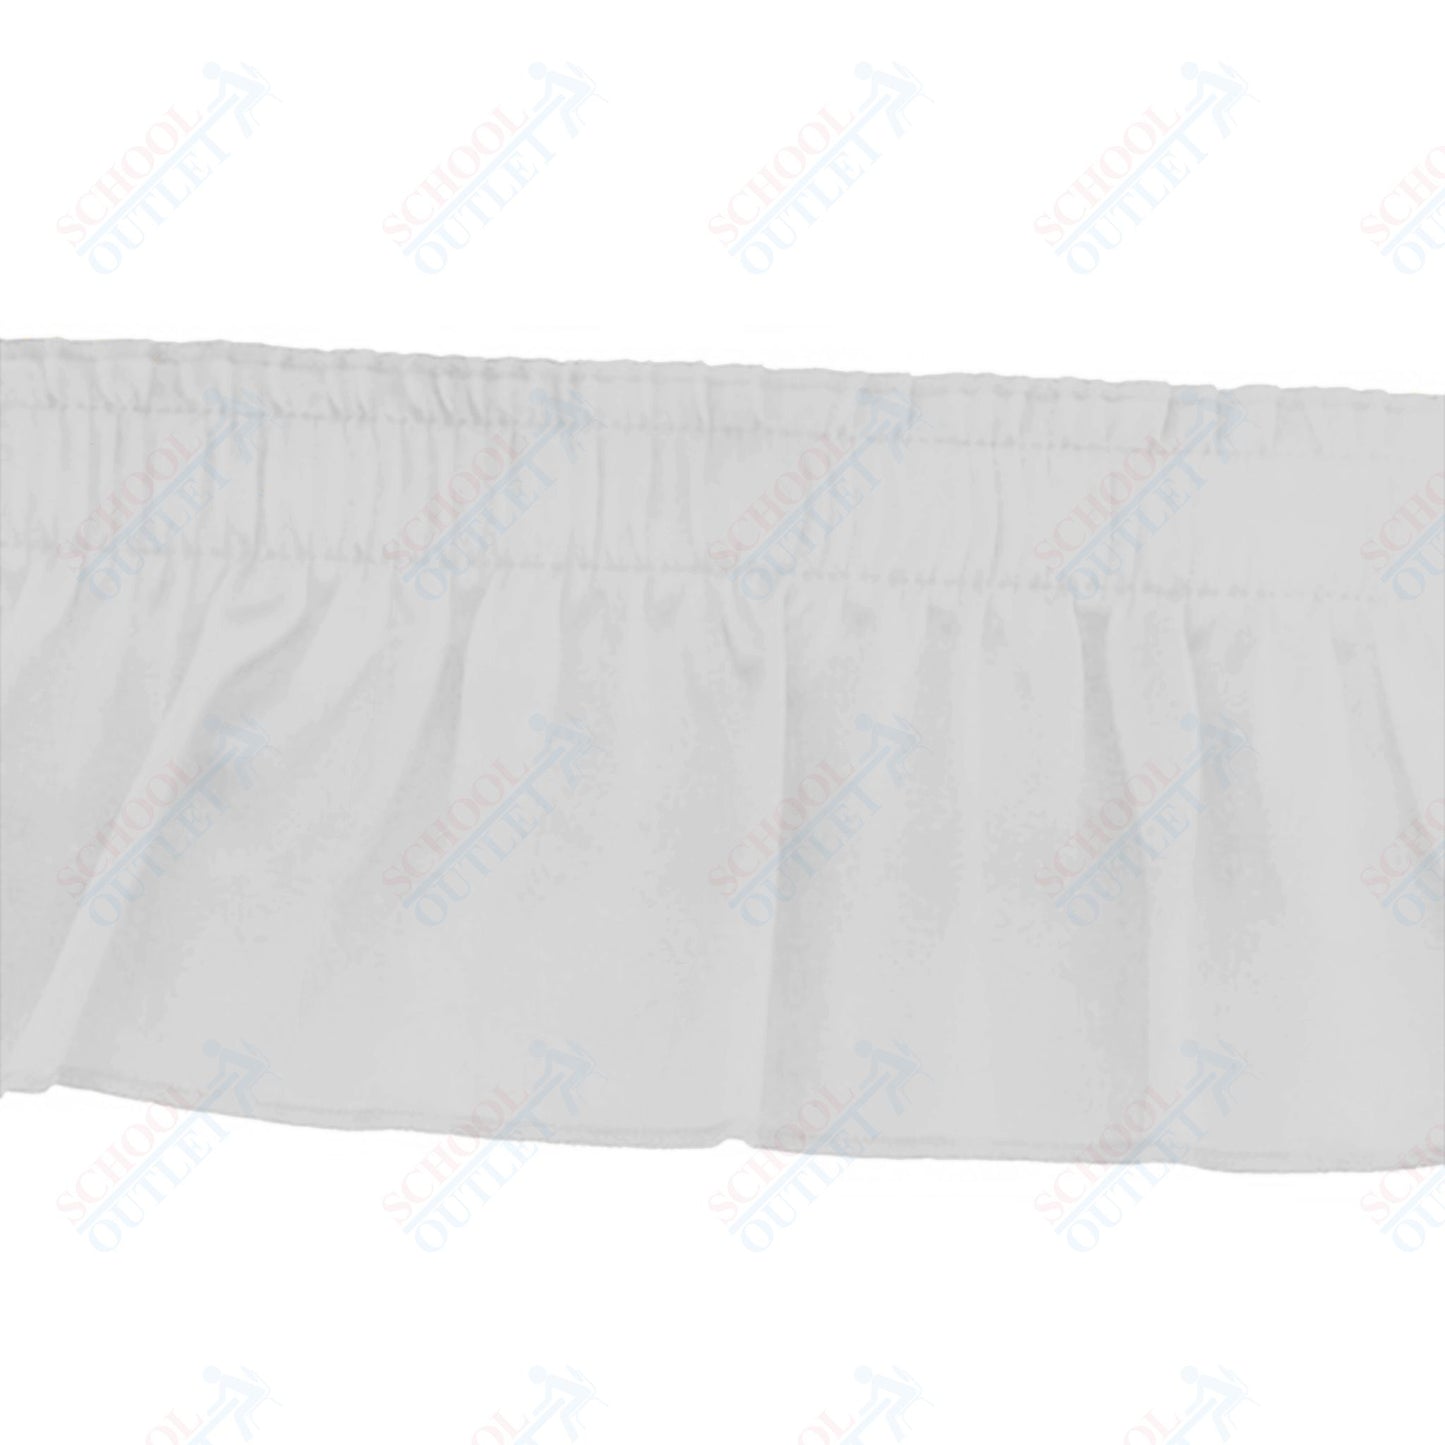 AmTab Stage and Riser Skirting - Shirred Pleat - 15" Skirting Height - Applicable for 16" Stage Height   (AmTab AMT-SKRT16)